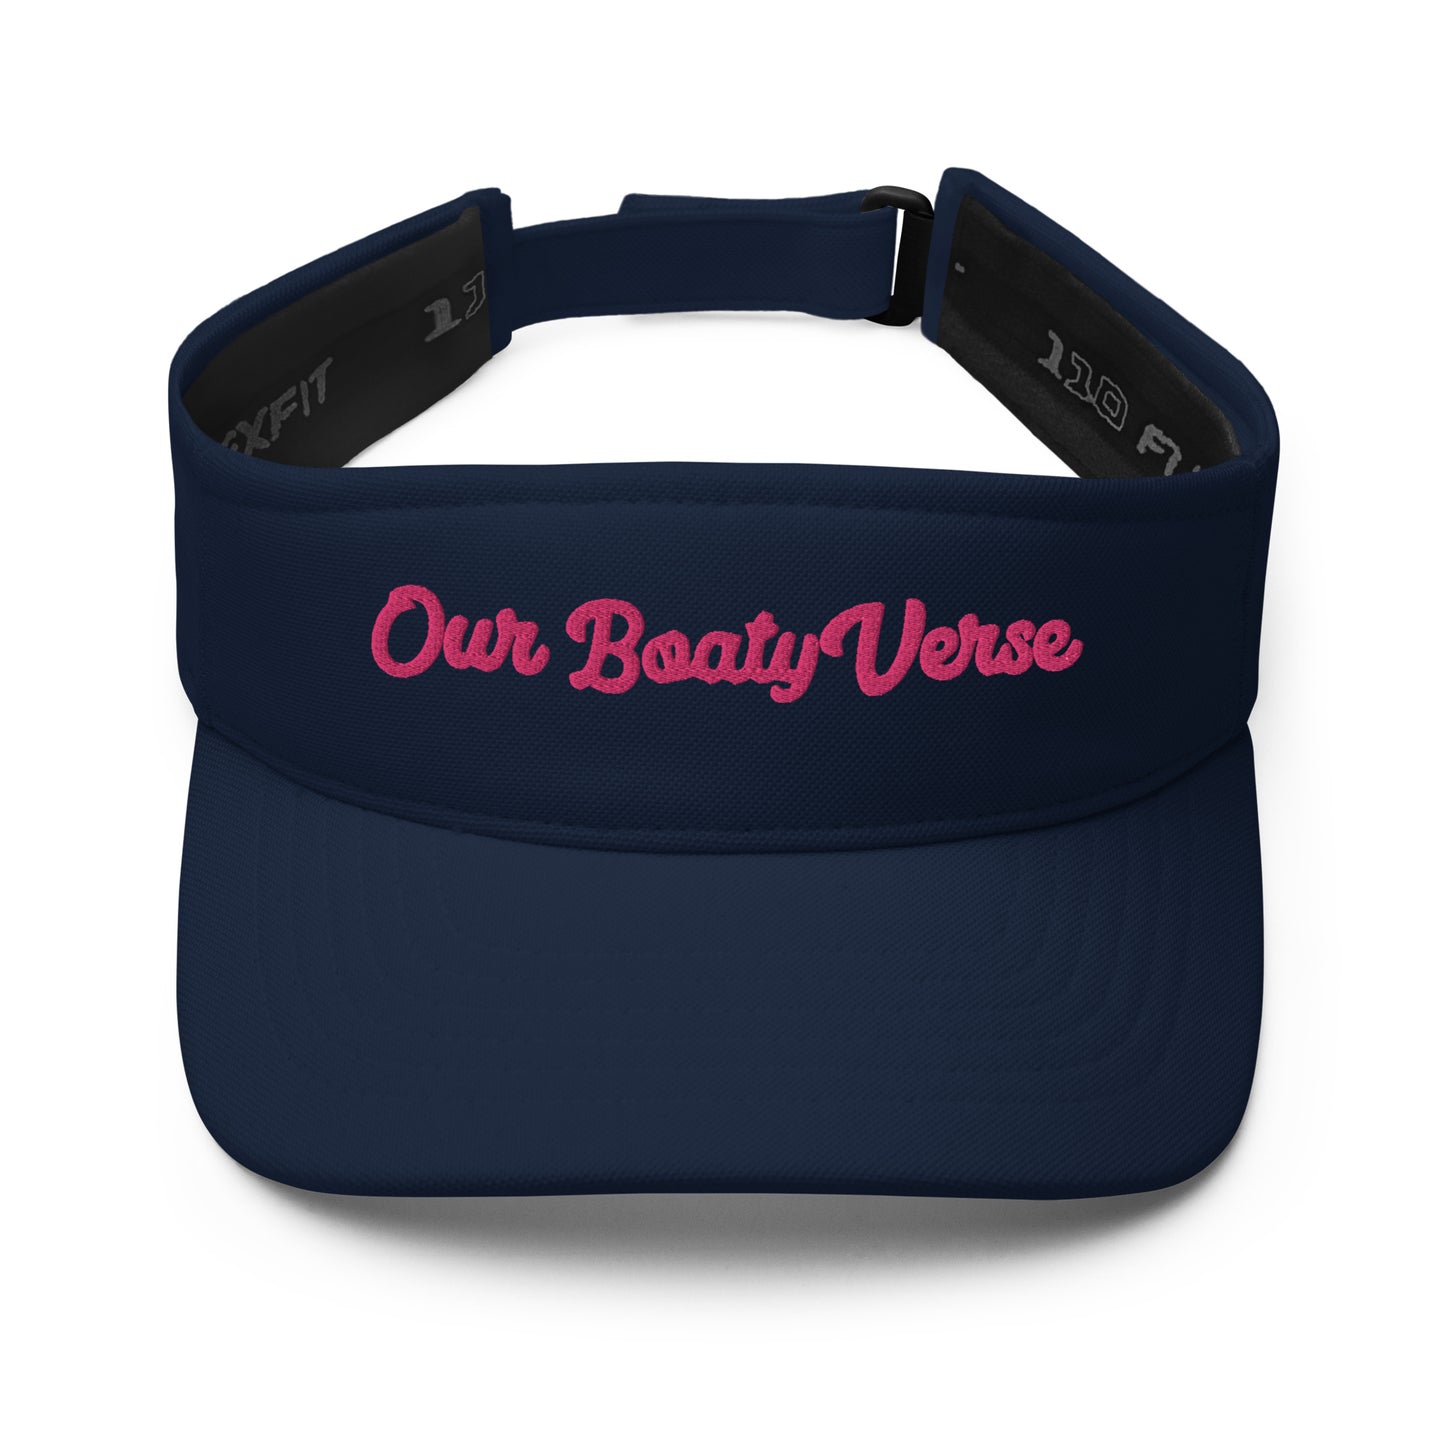 Our BoatyVerse Visor